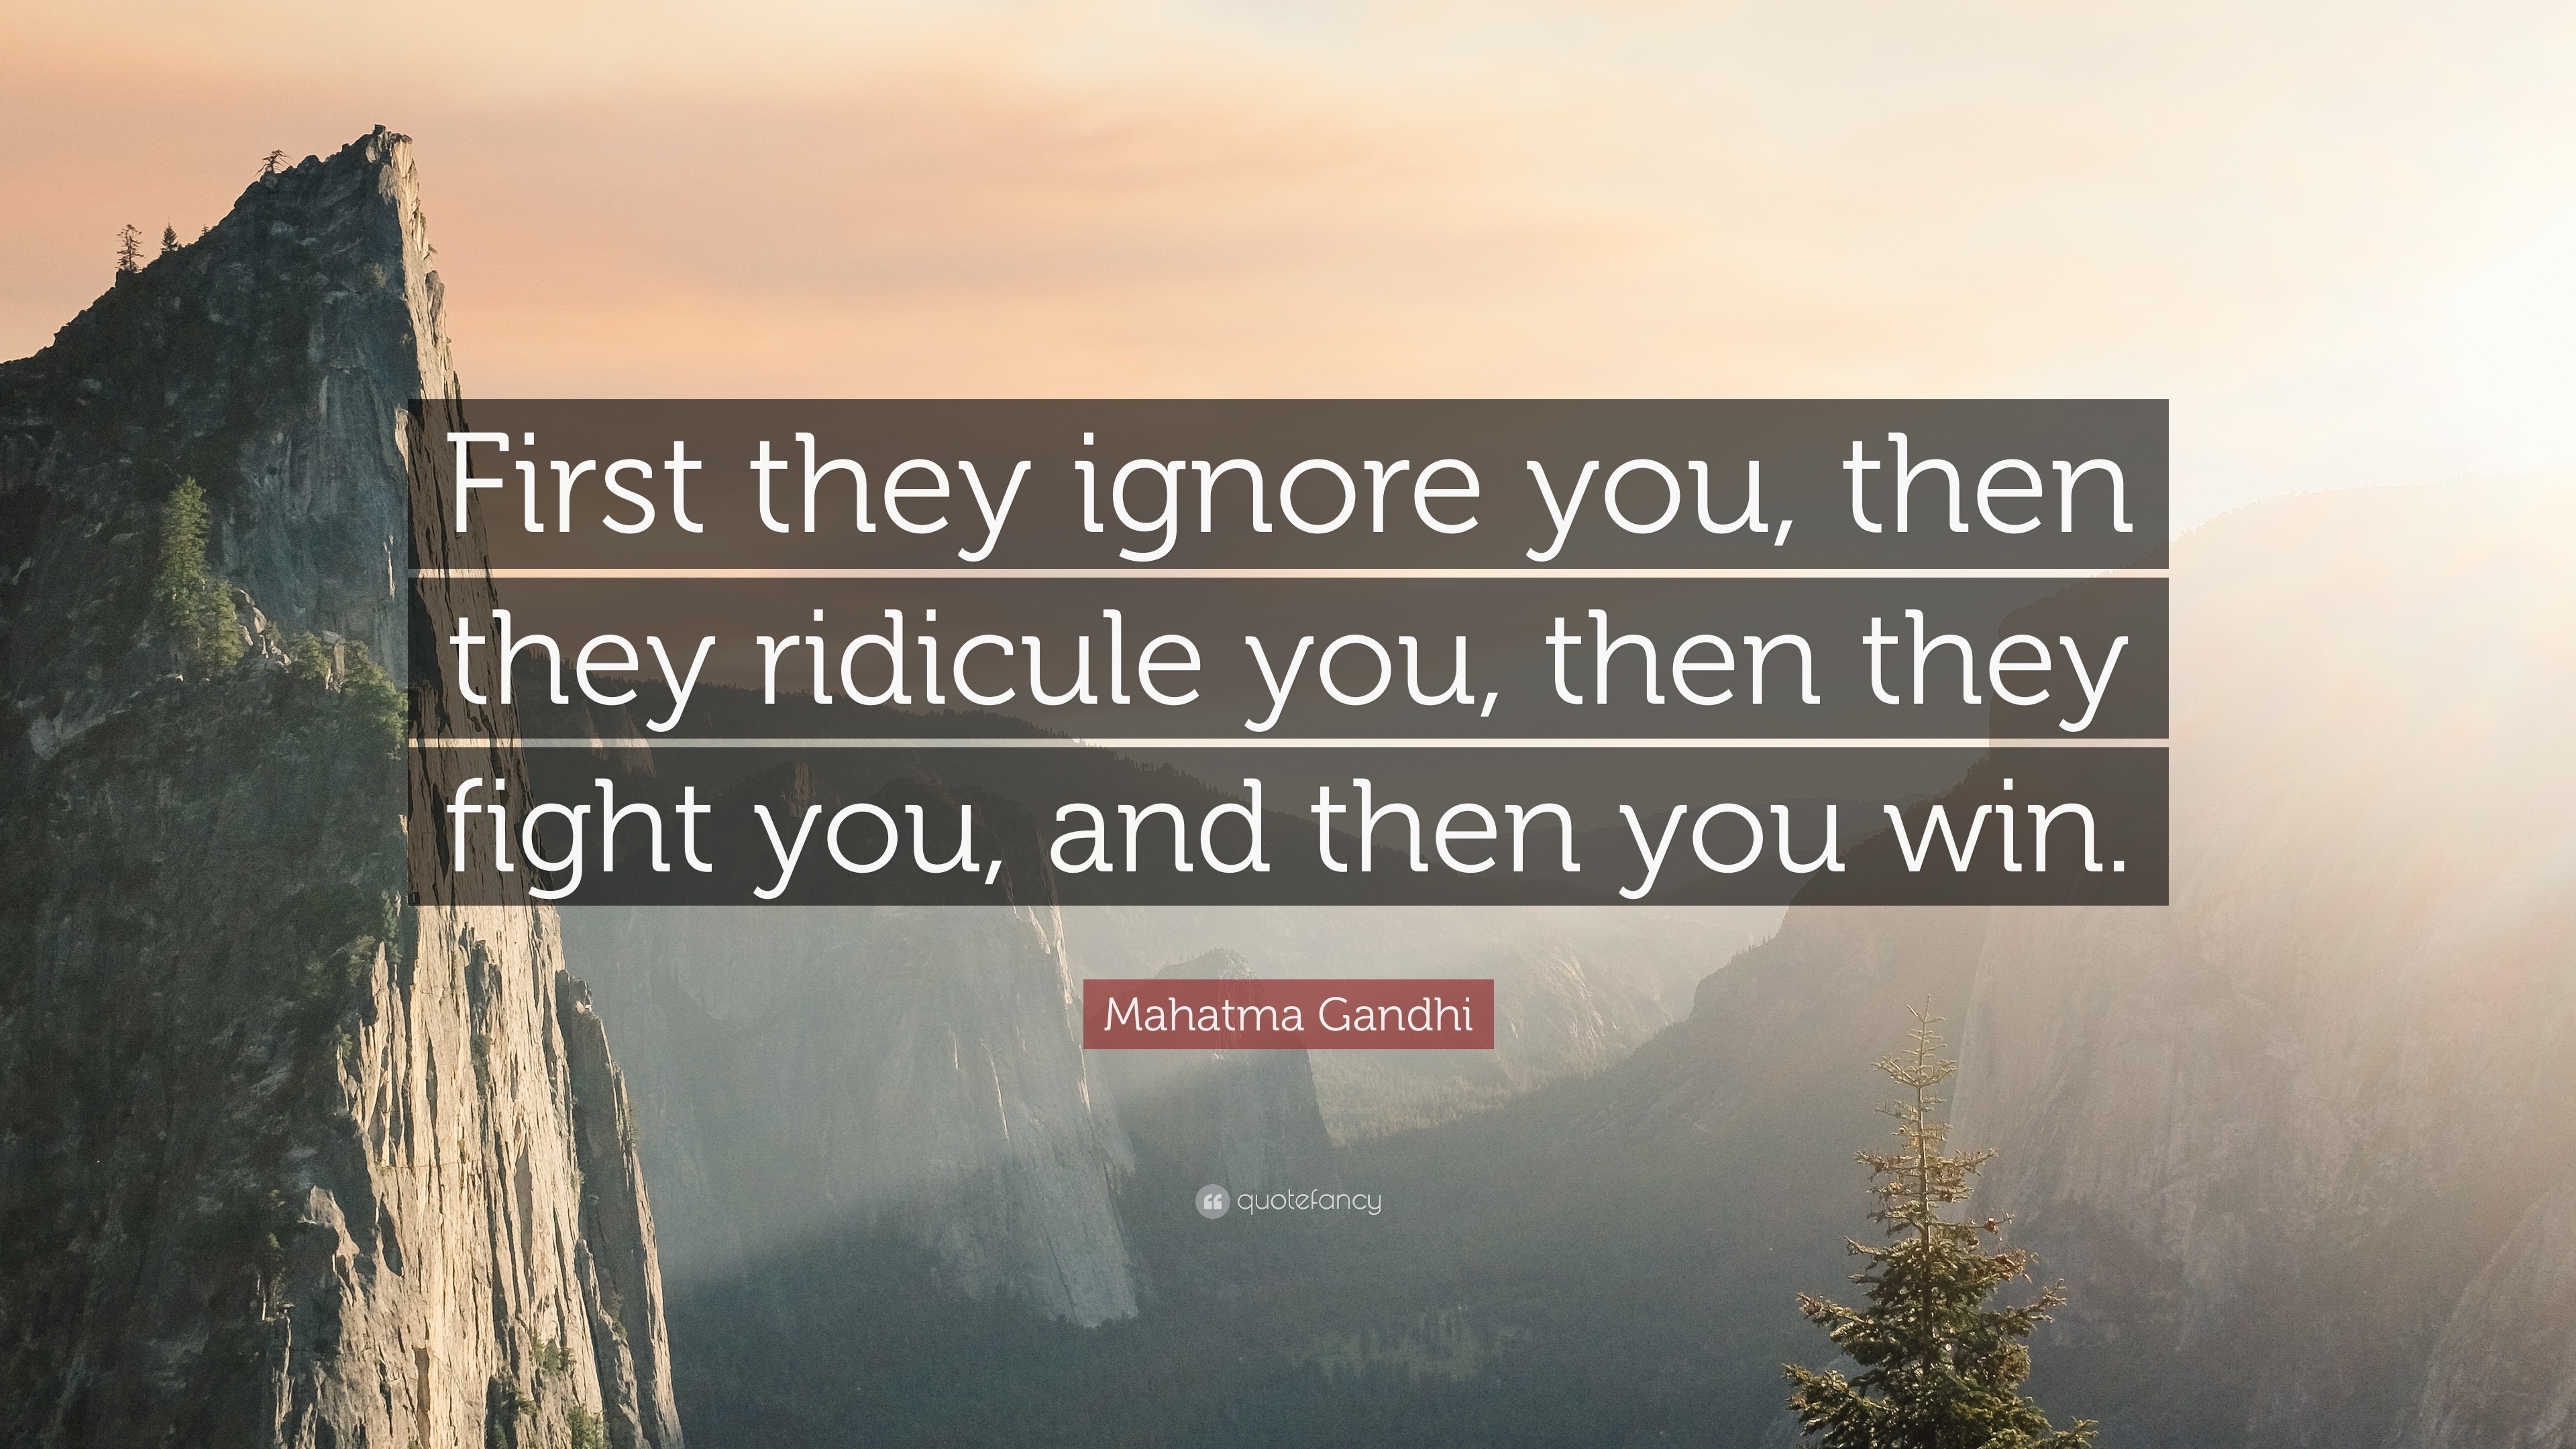 Mahatma Gandhi Quote: “First they ignore you, then they ridicule you